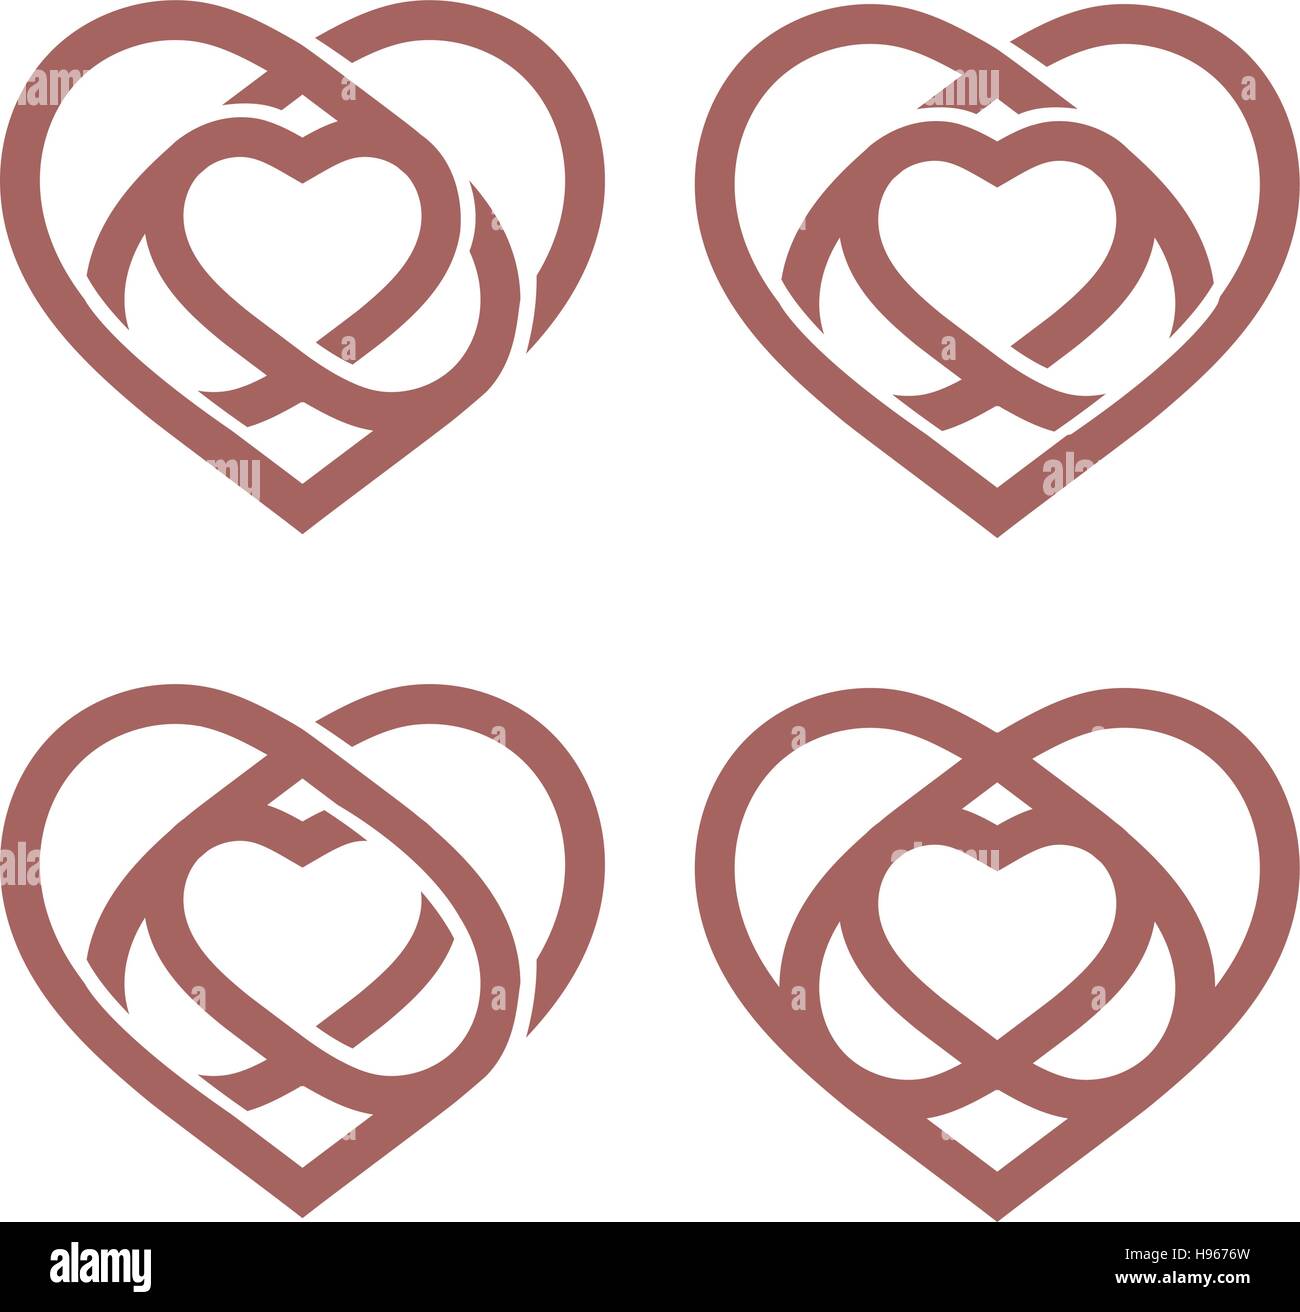 Isolated abstract monoline heart logo set. Love logotypes collection. St. Valentines day icon. Wedding symbol. Amour sign. Cardiology emblem. Vector illustration. Stock Vector